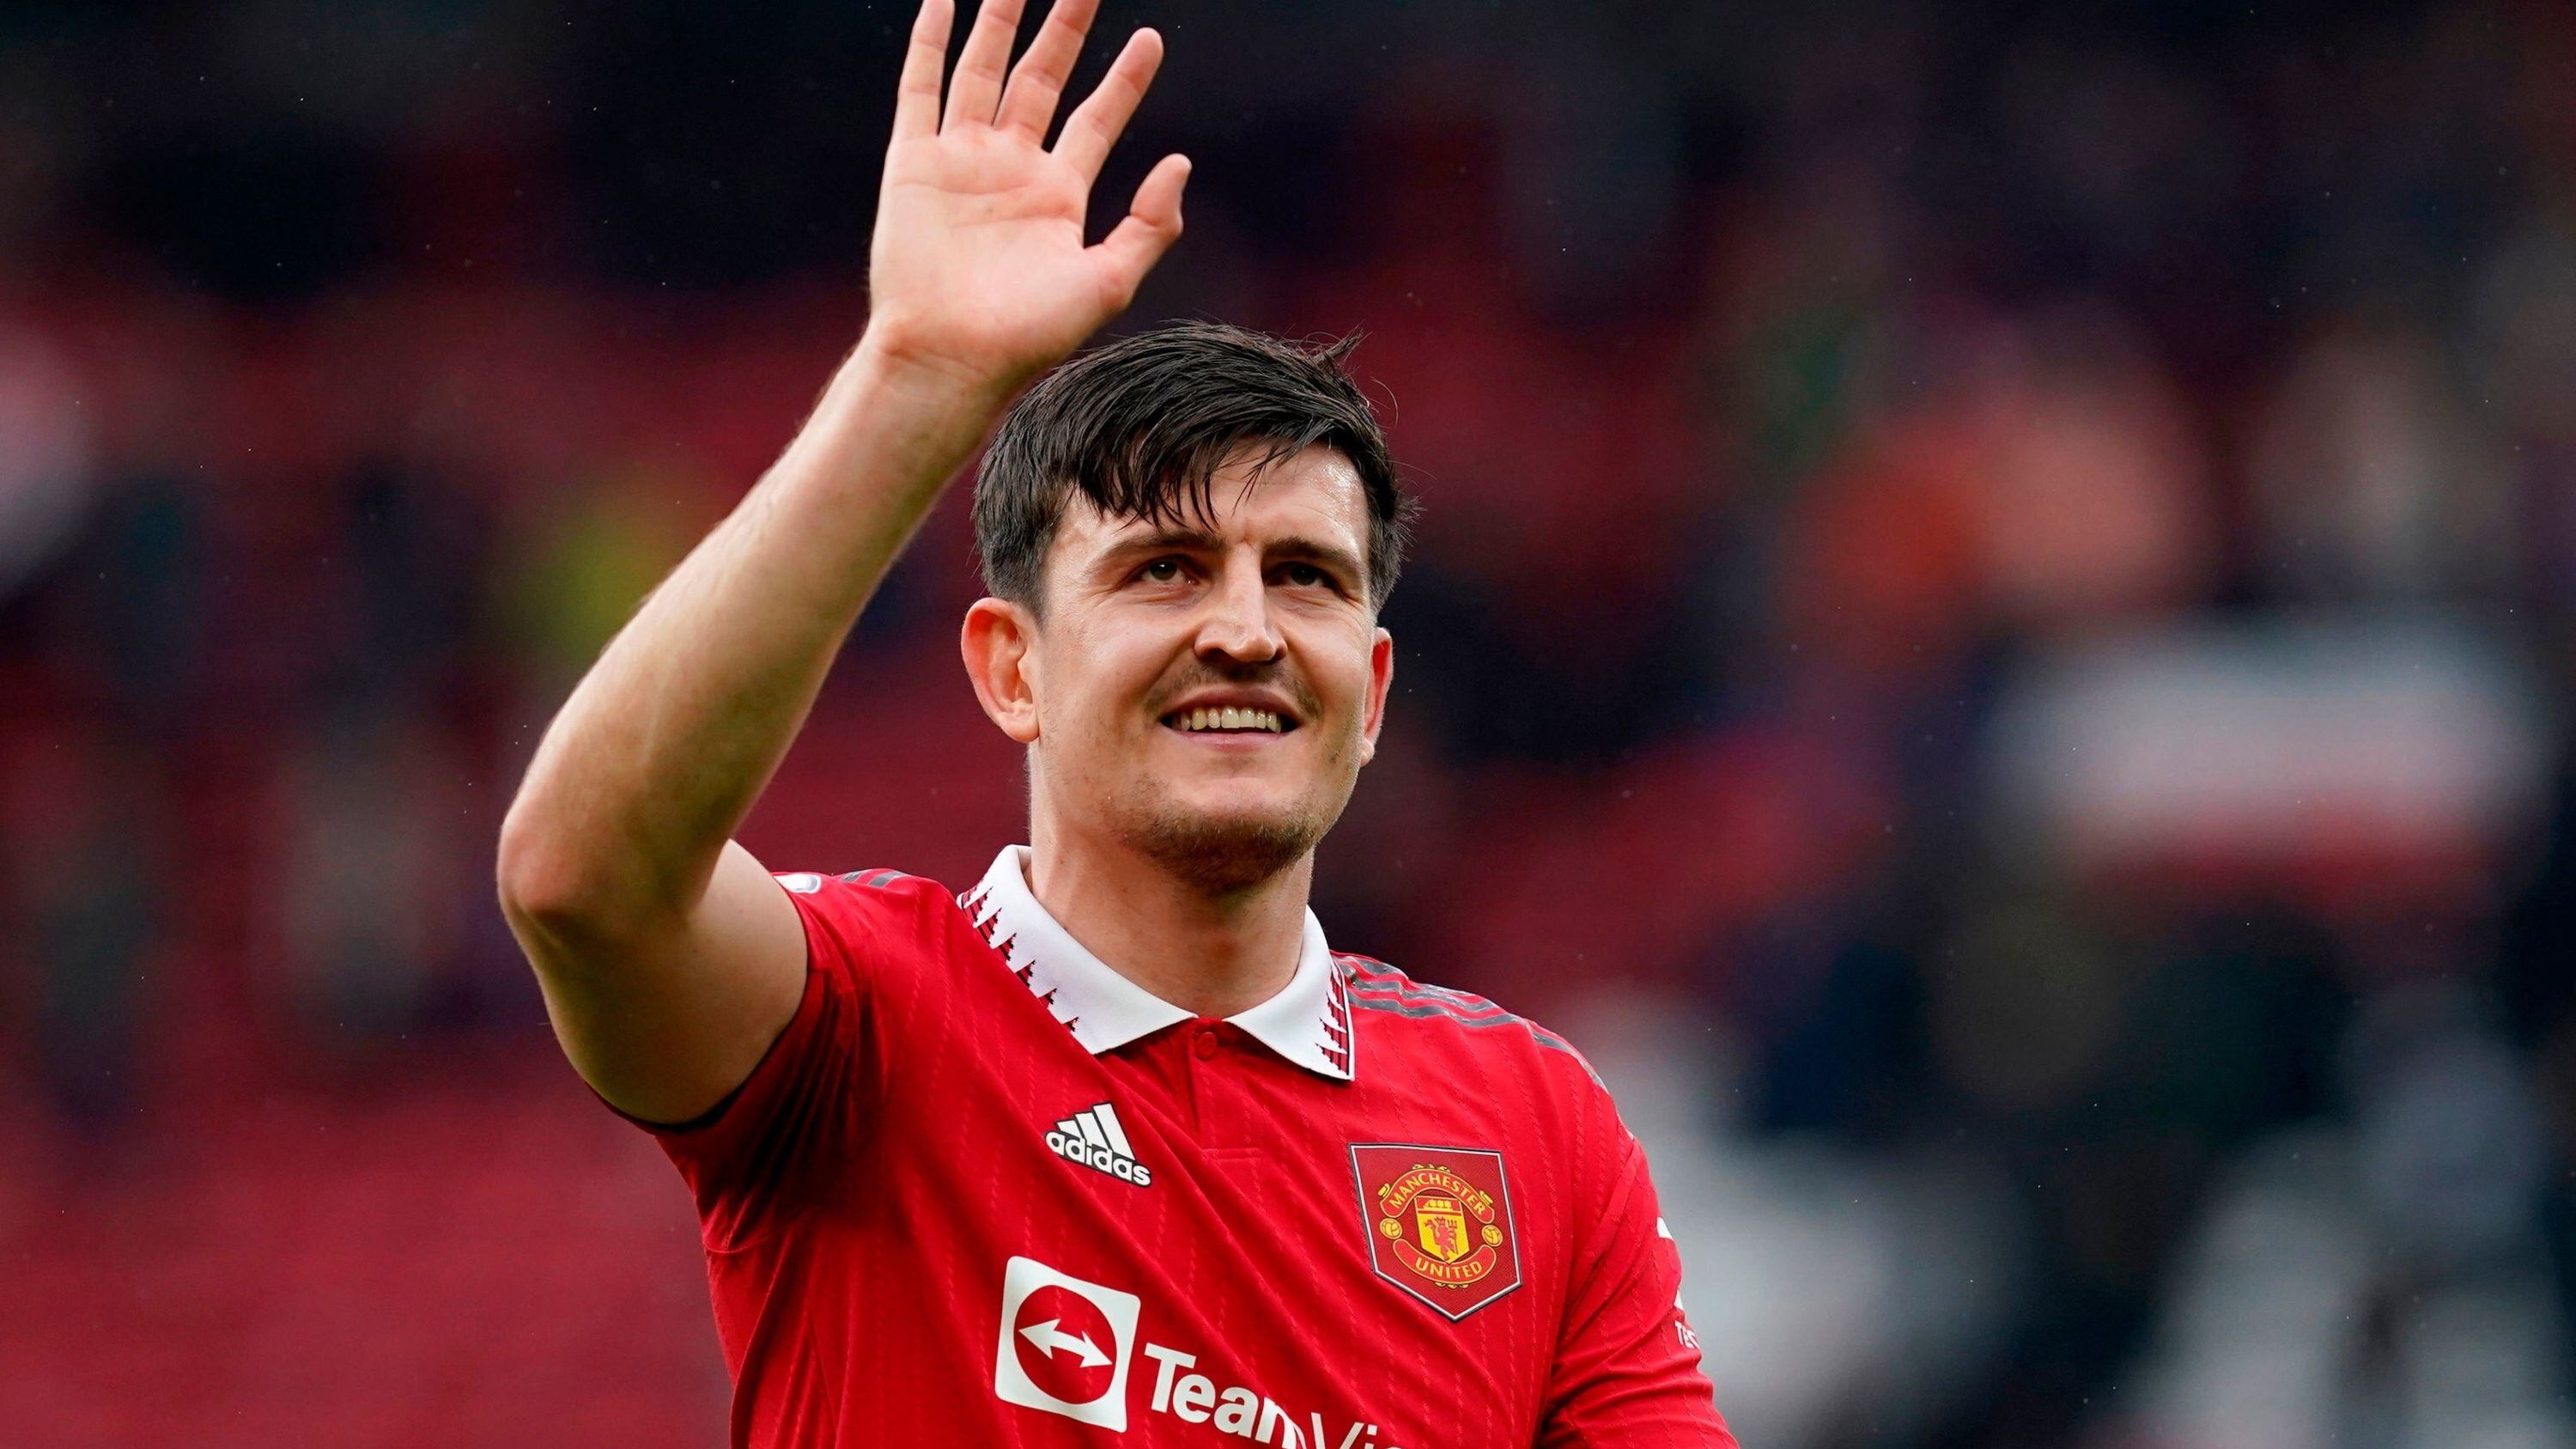 While Maguire cost Manchester United 90 million, the amount West Ham is offering for the player